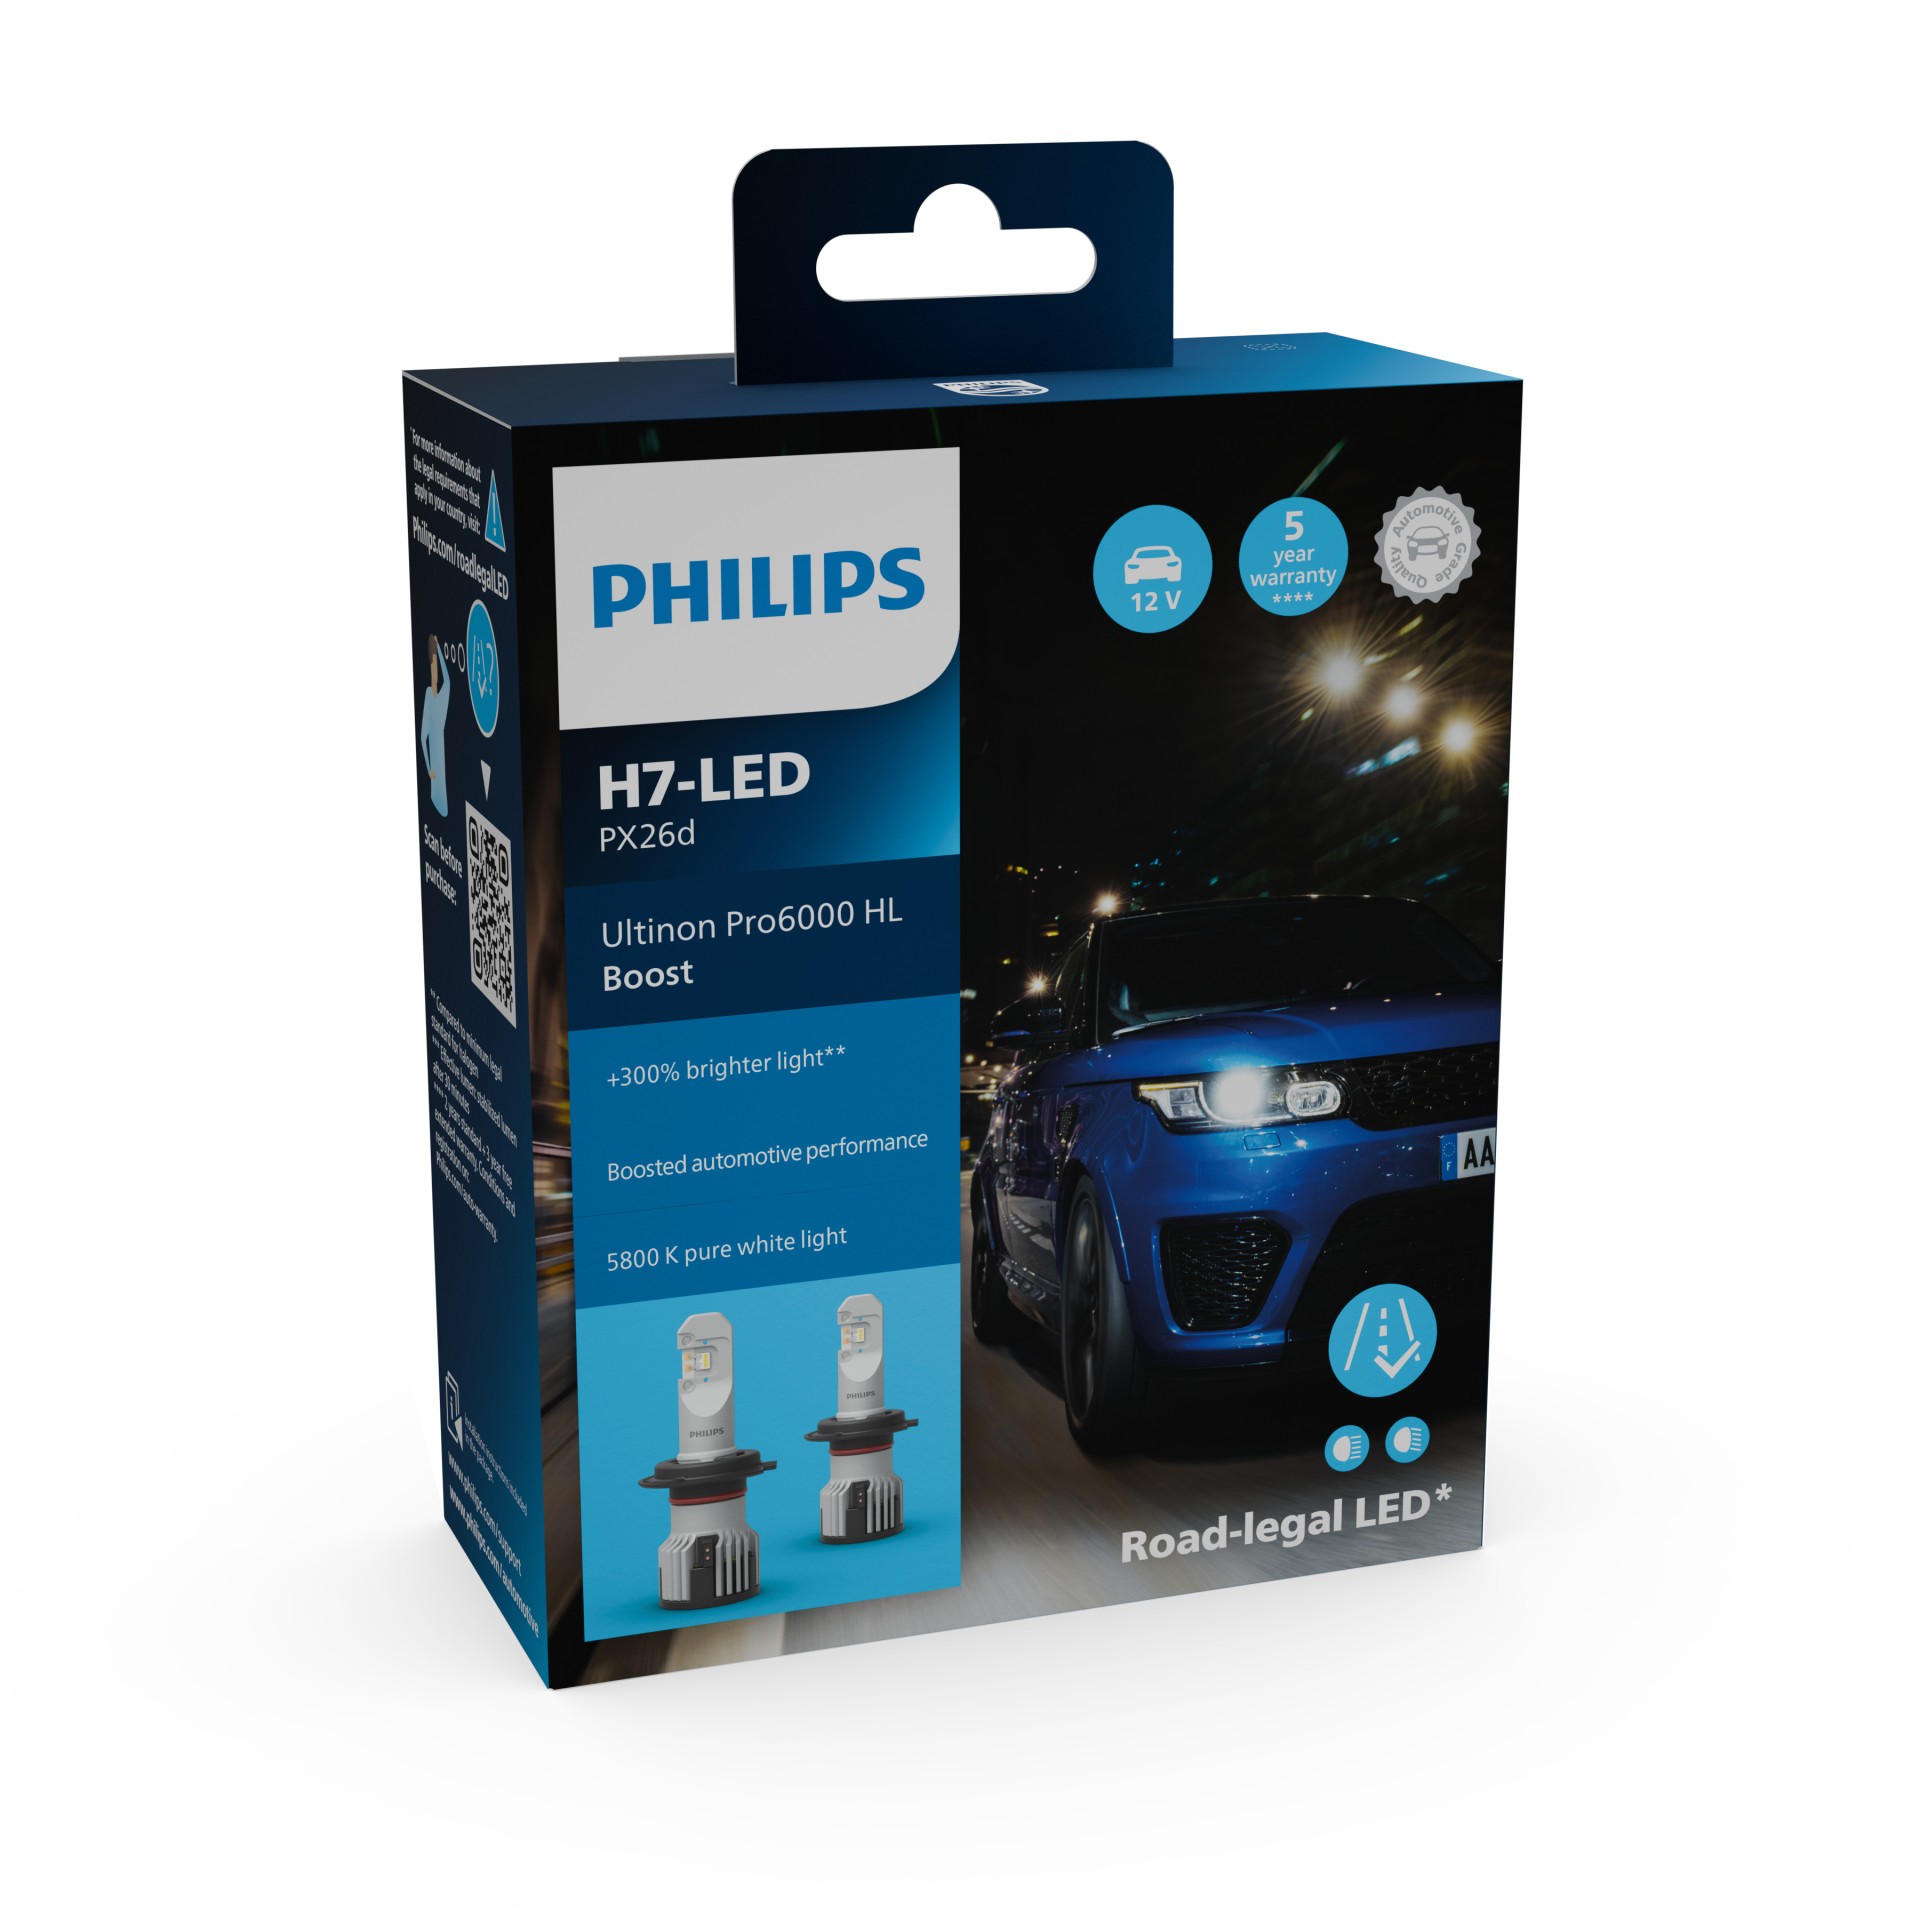 PHILIPS H7-LED Ultinon Pro6000 Boost